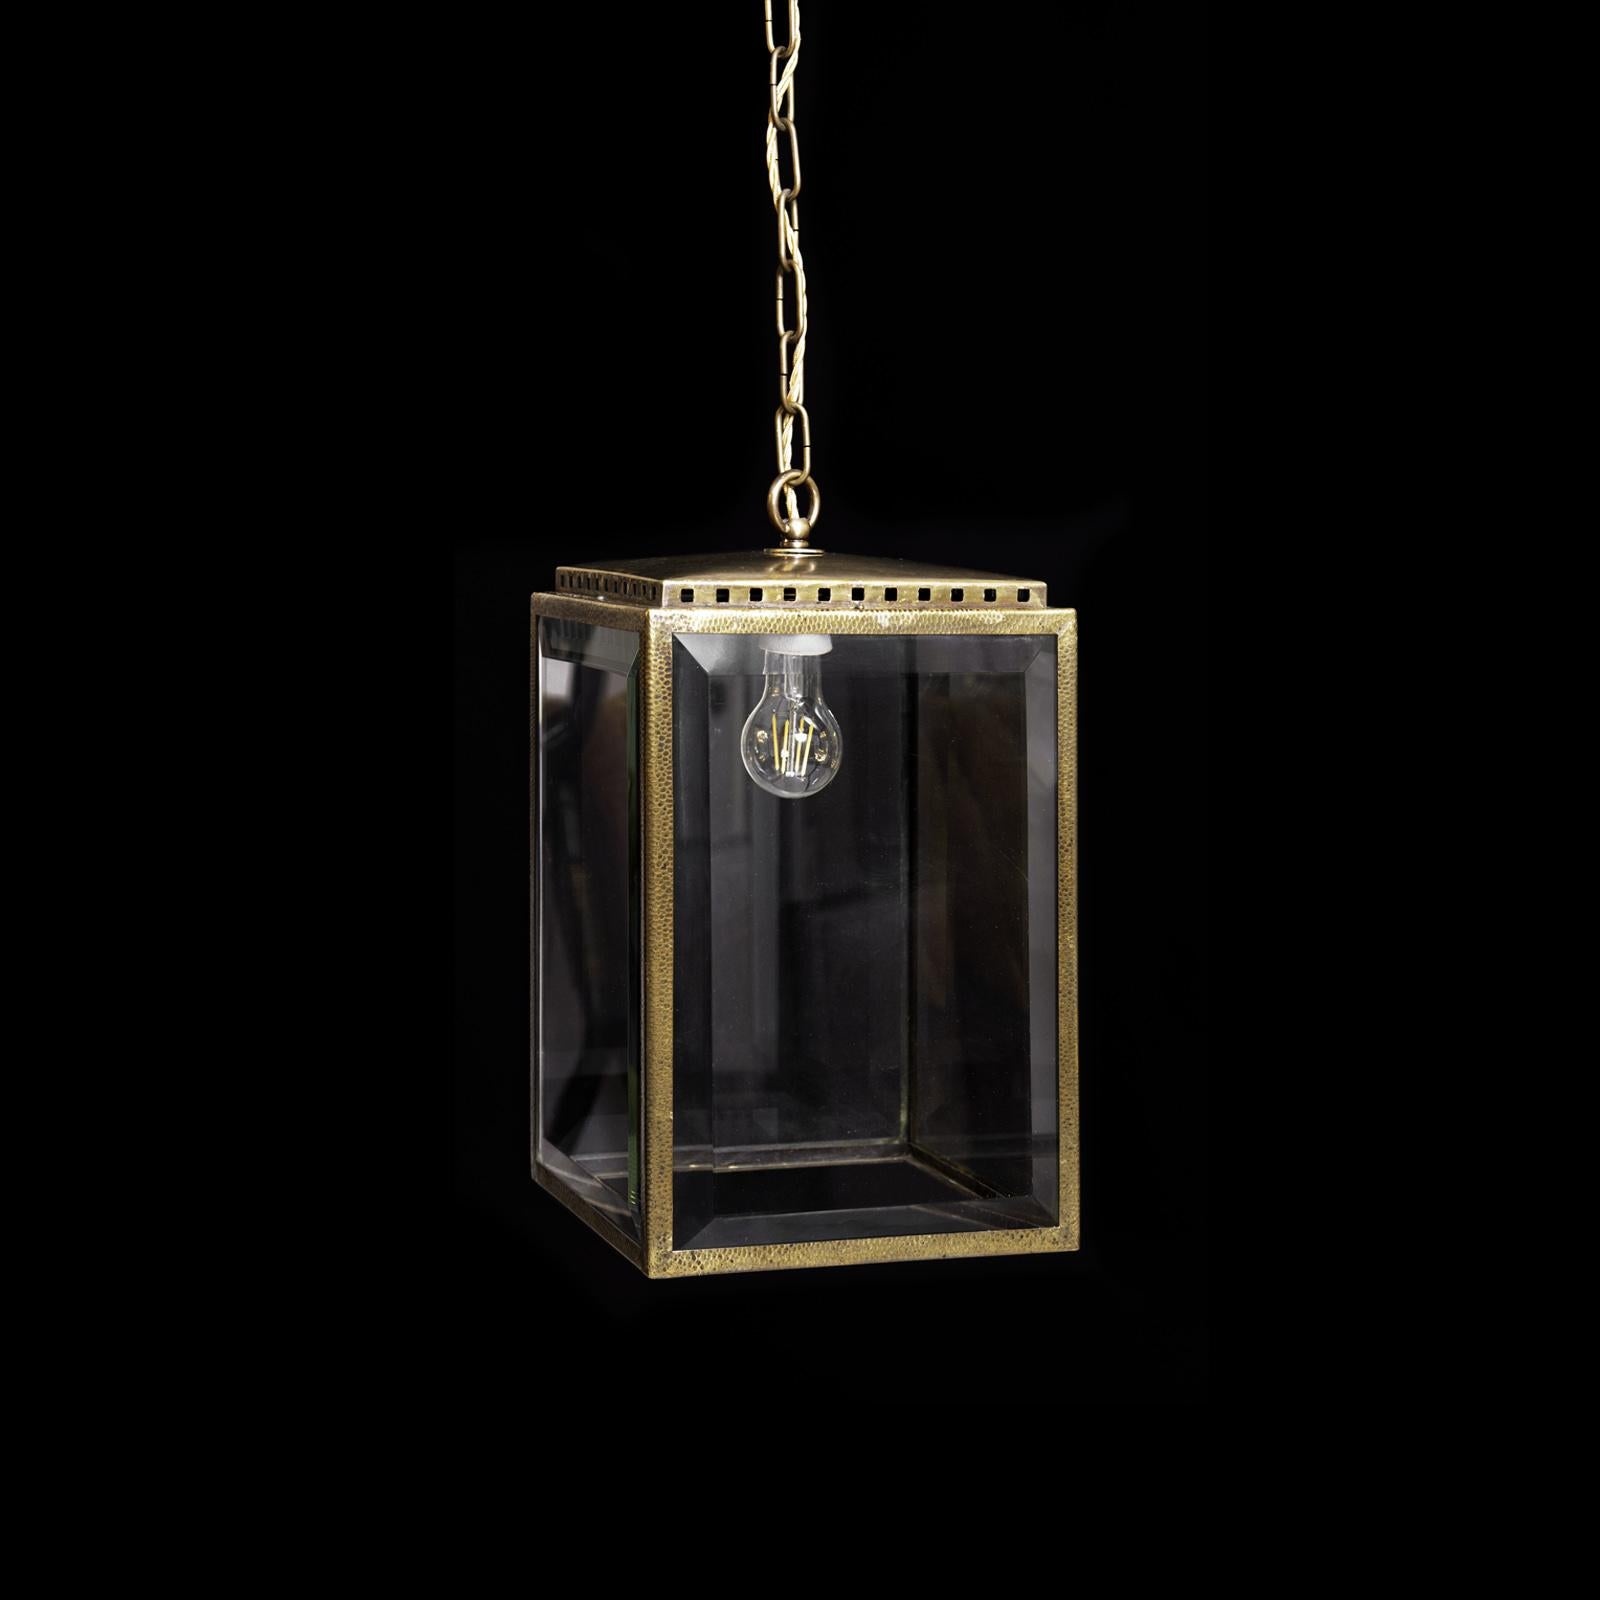 Beautiful lantern in the style of the early Josef Hoffmann and the historical Wiener Werkstaette, hammered with typical ornaments of this period - Quadratlhoffmann - means the Hoffmann with the squares, 1903.